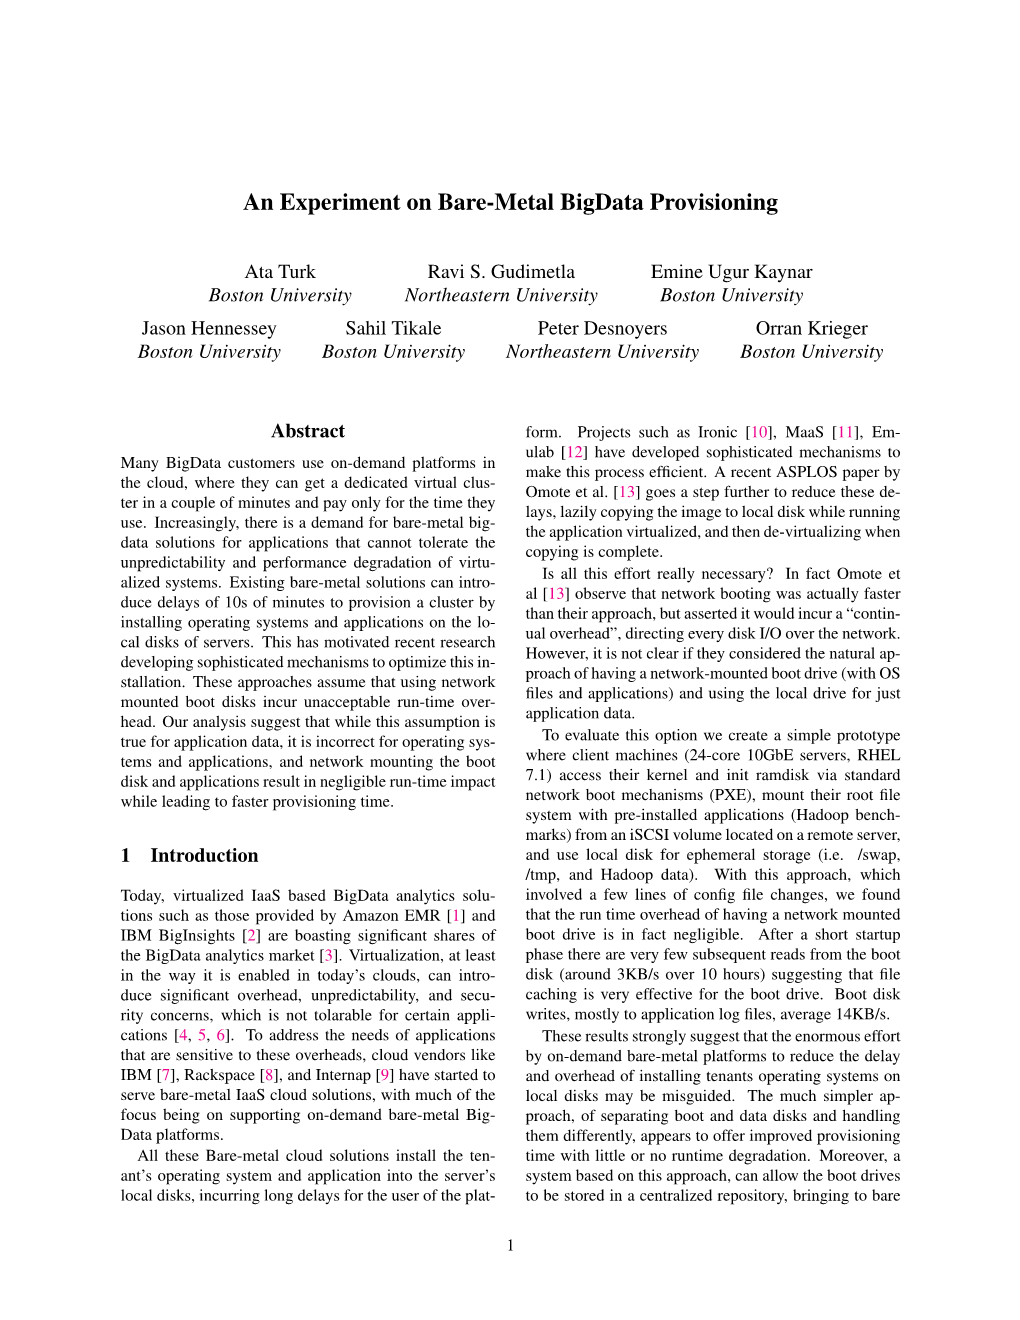 An Experiment on Bare-Metal Bigdata Provisioning